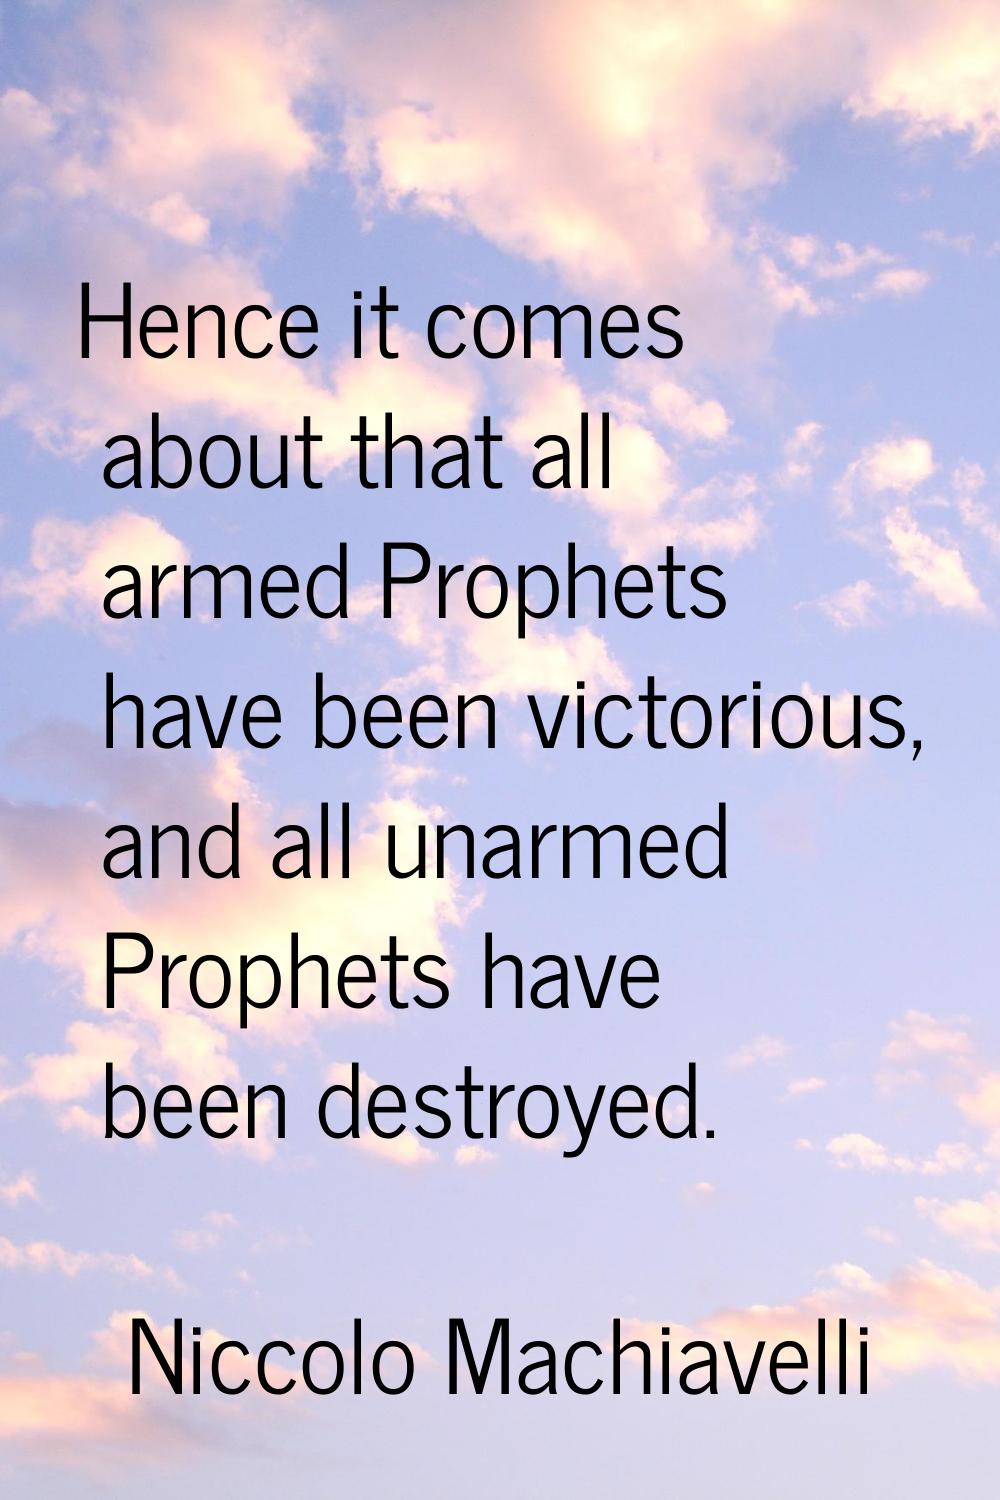 Hence it comes about that all armed Prophets have been victorious, and all unarmed Prophets have be